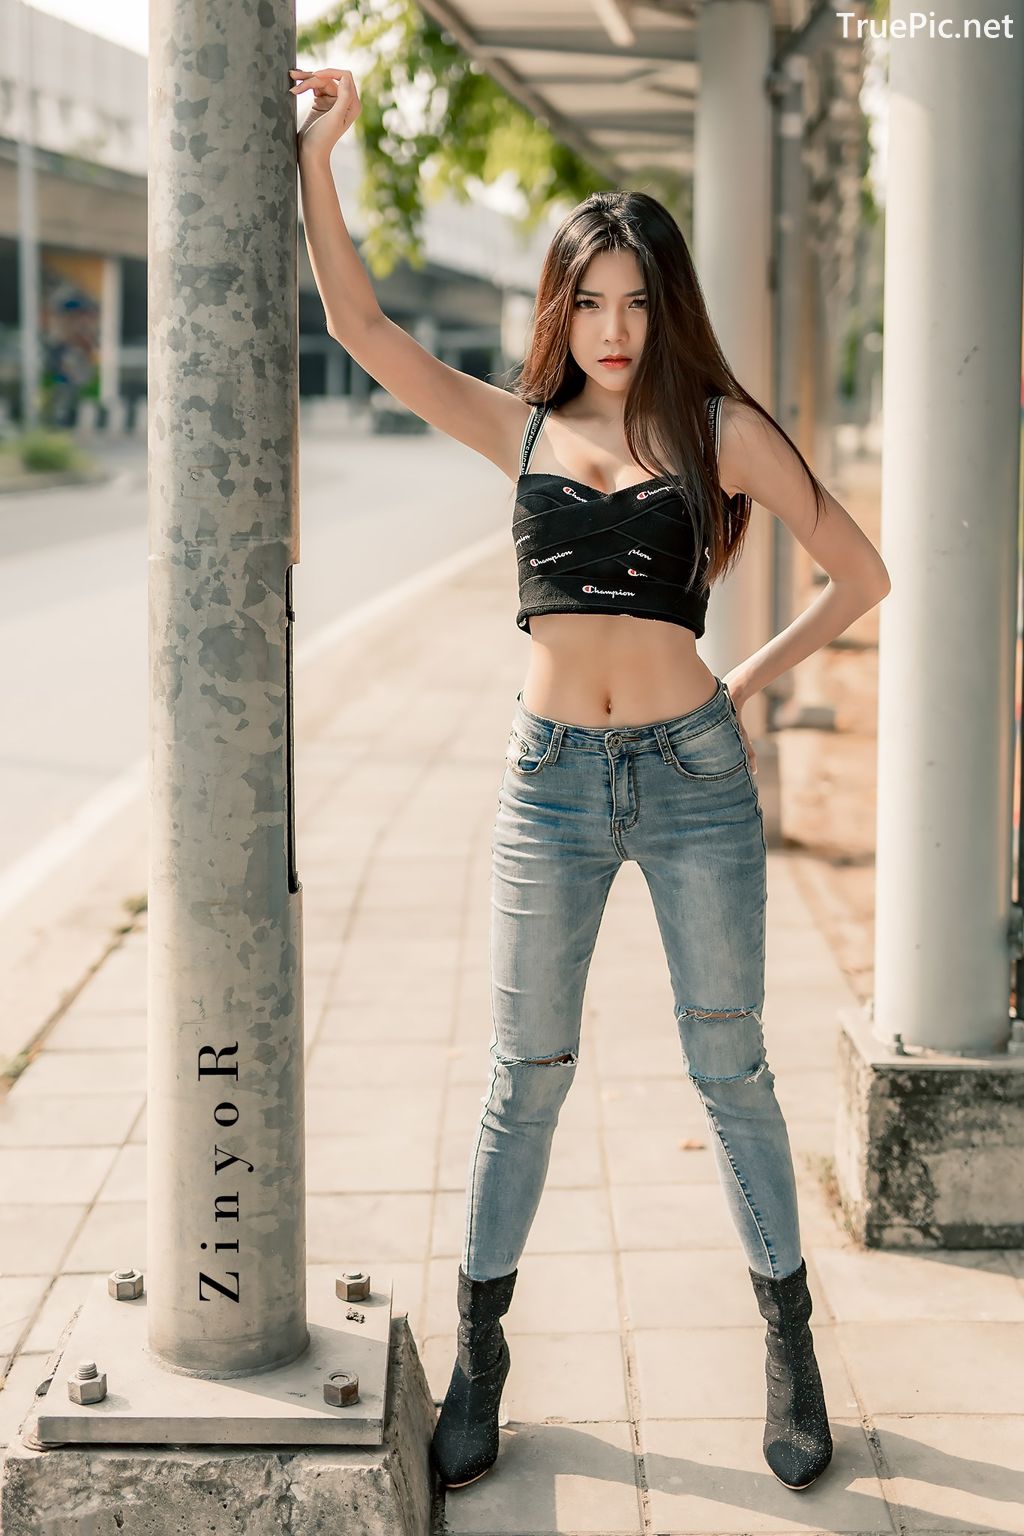 Image-Thailand-Model-Phitchamol-Srijantanet-Black-Crop-Top-and-Jean-TruePic.net- Picture-17